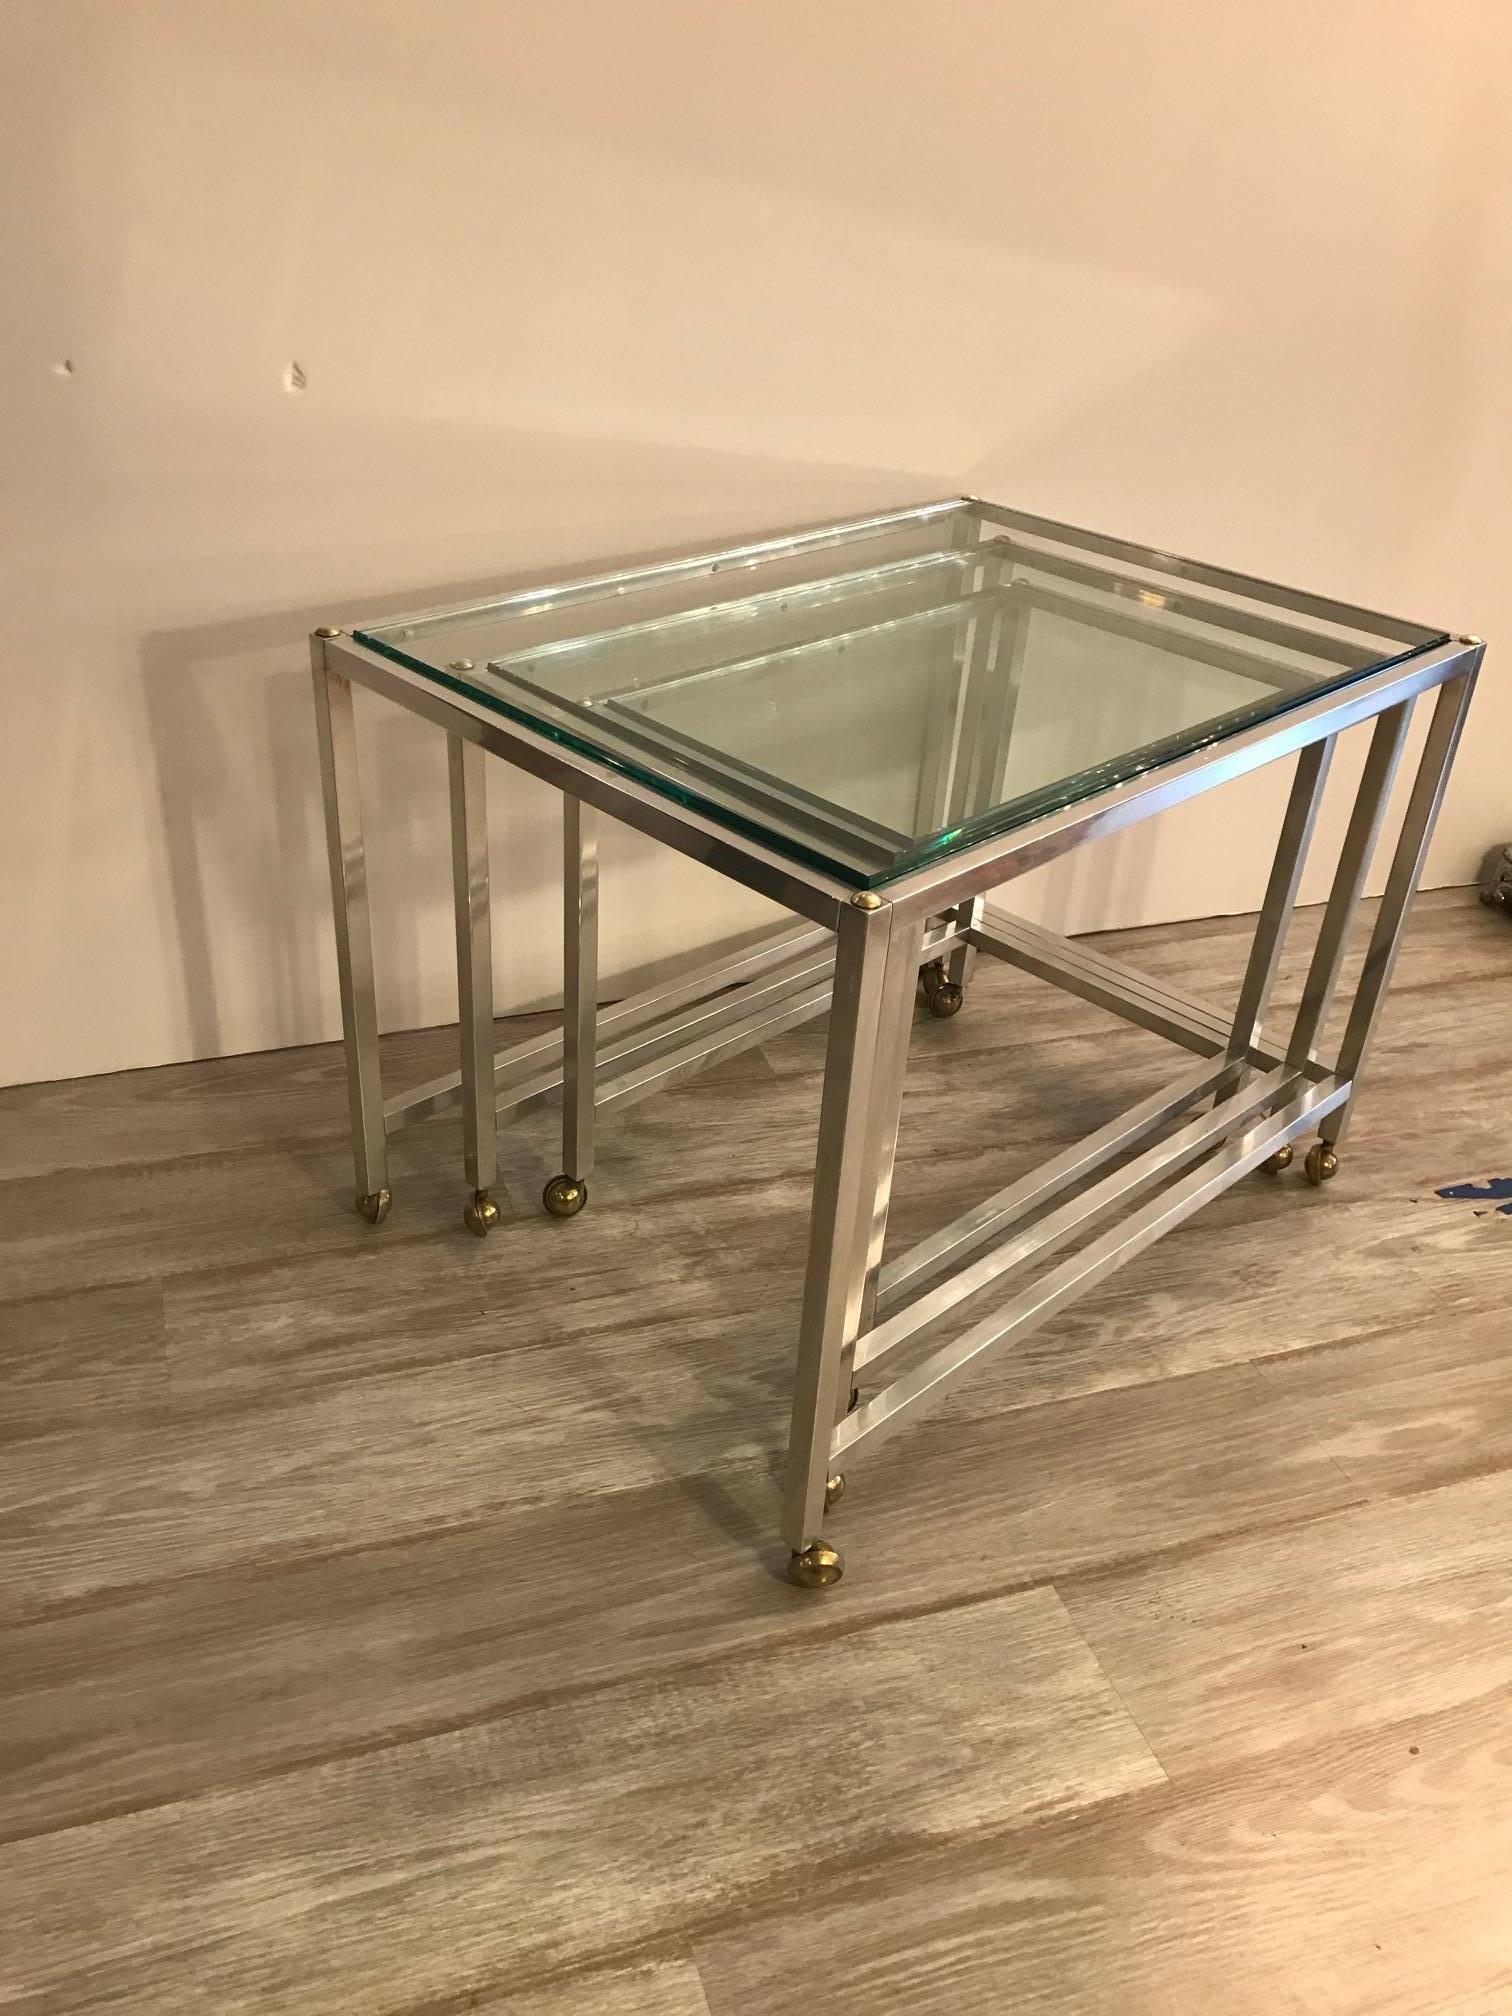 Mid-Century Modern set of glass top nesting tables. The cube form of three tables with castors, each table fits neatly into the other in sturdy polished aluminium with brass appointments. The largest table is 20 by 28, 20 inches tall, the smallest